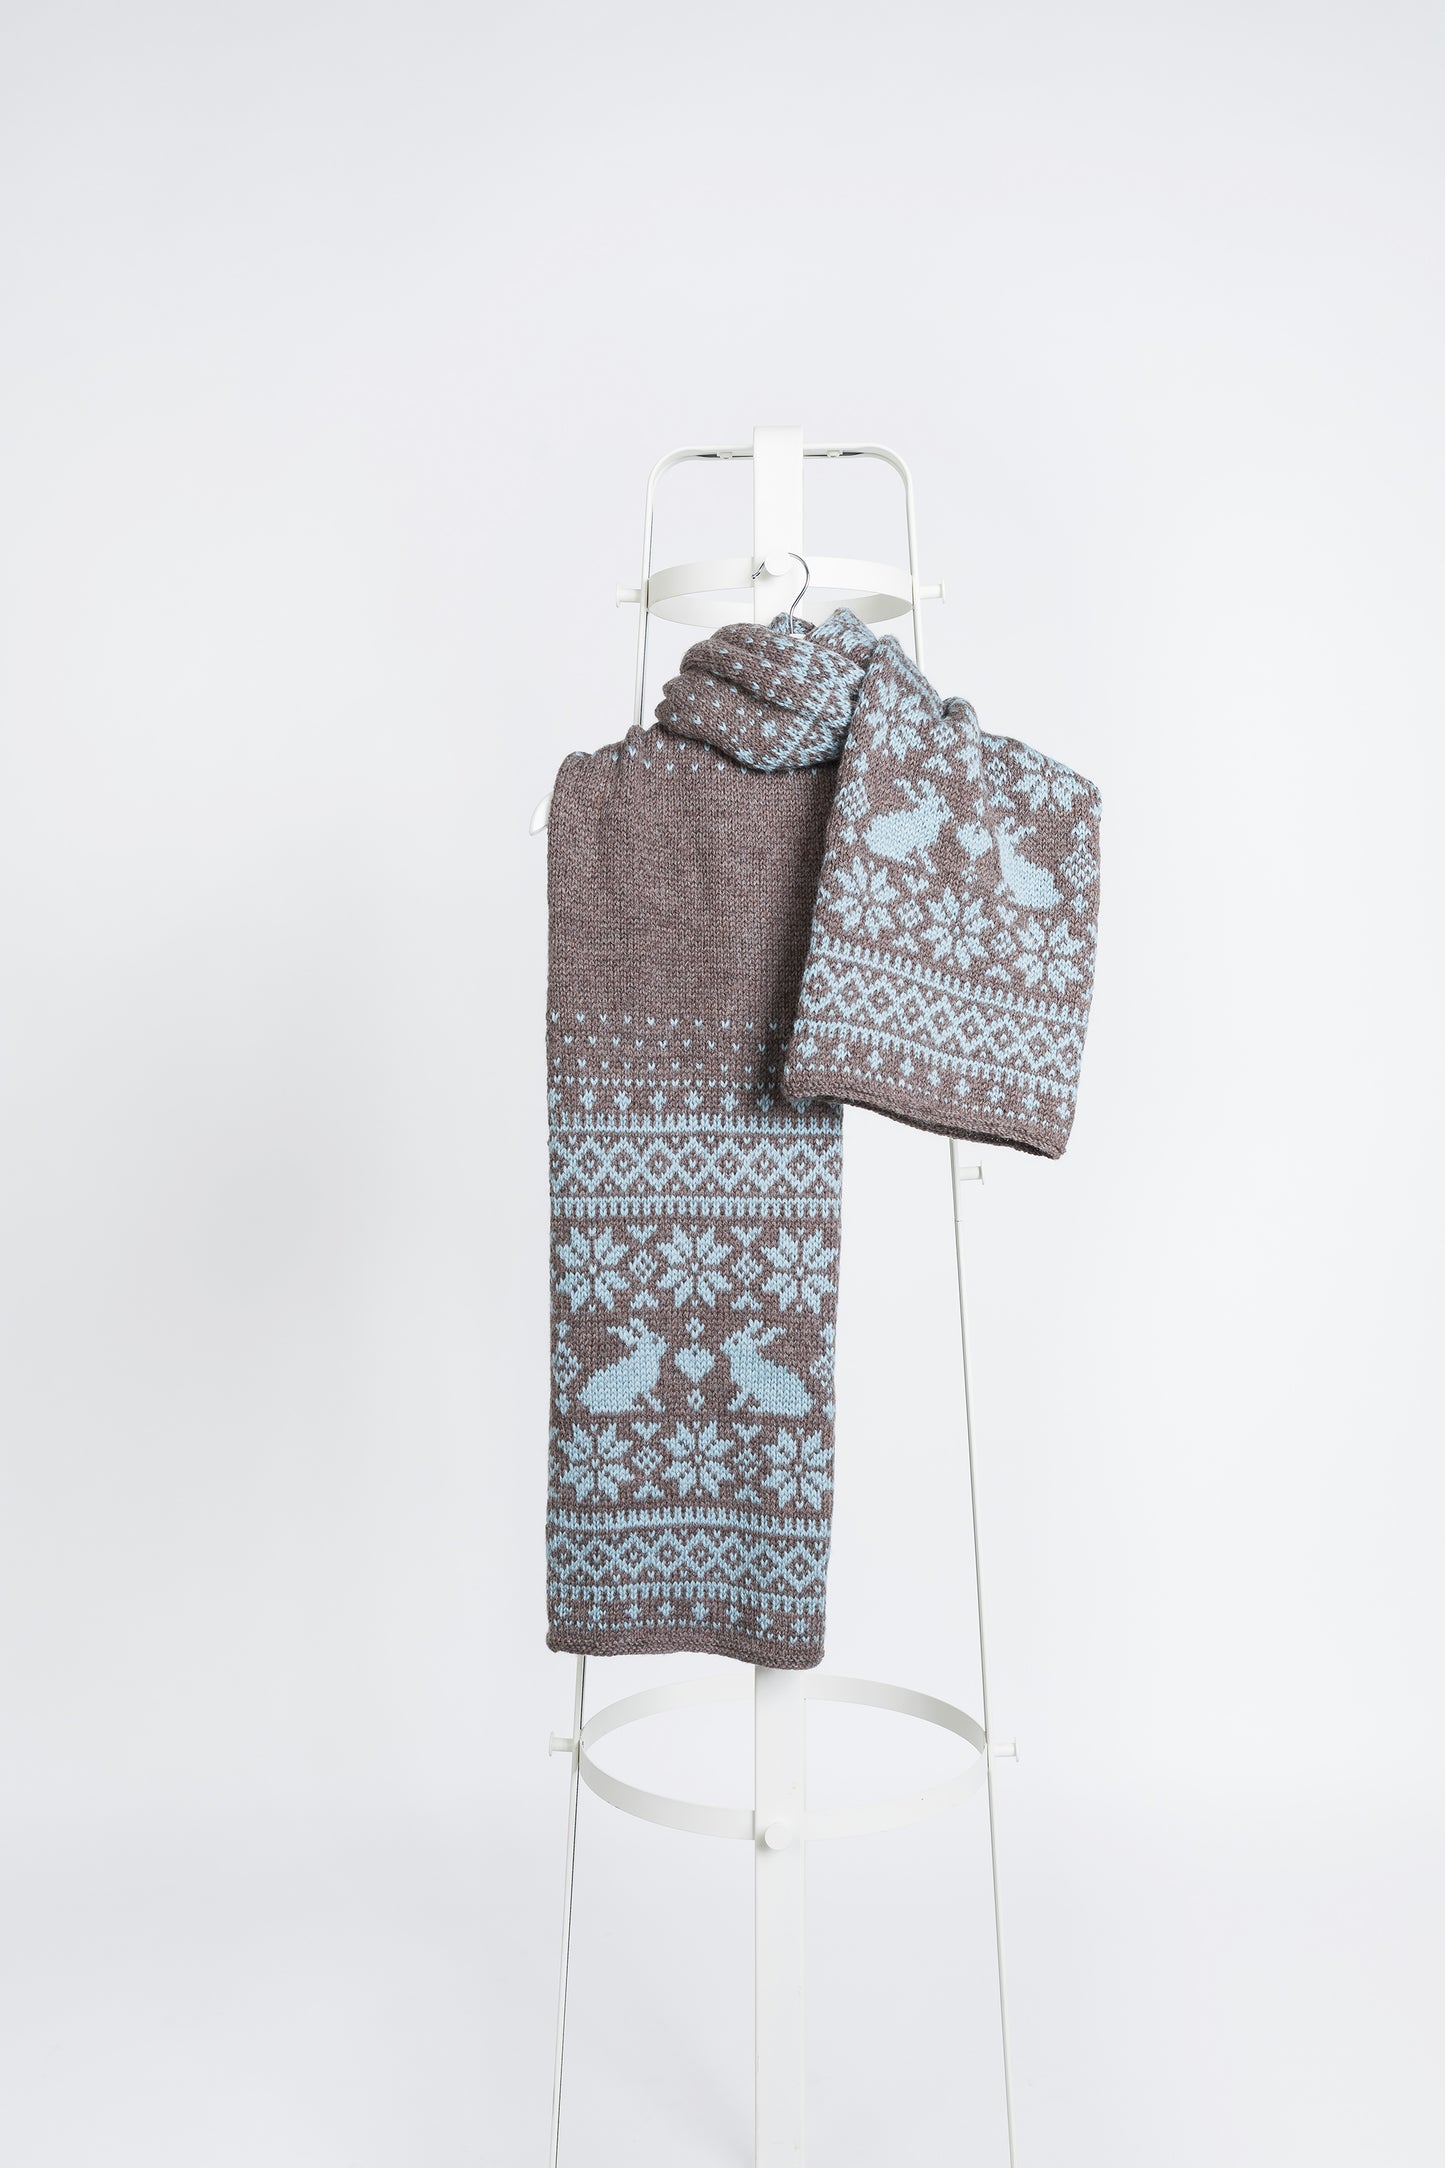 Brown and blue wool long hand-knitted Fair Isle scarf in Bunny Rabbits knitting pattern on a white background